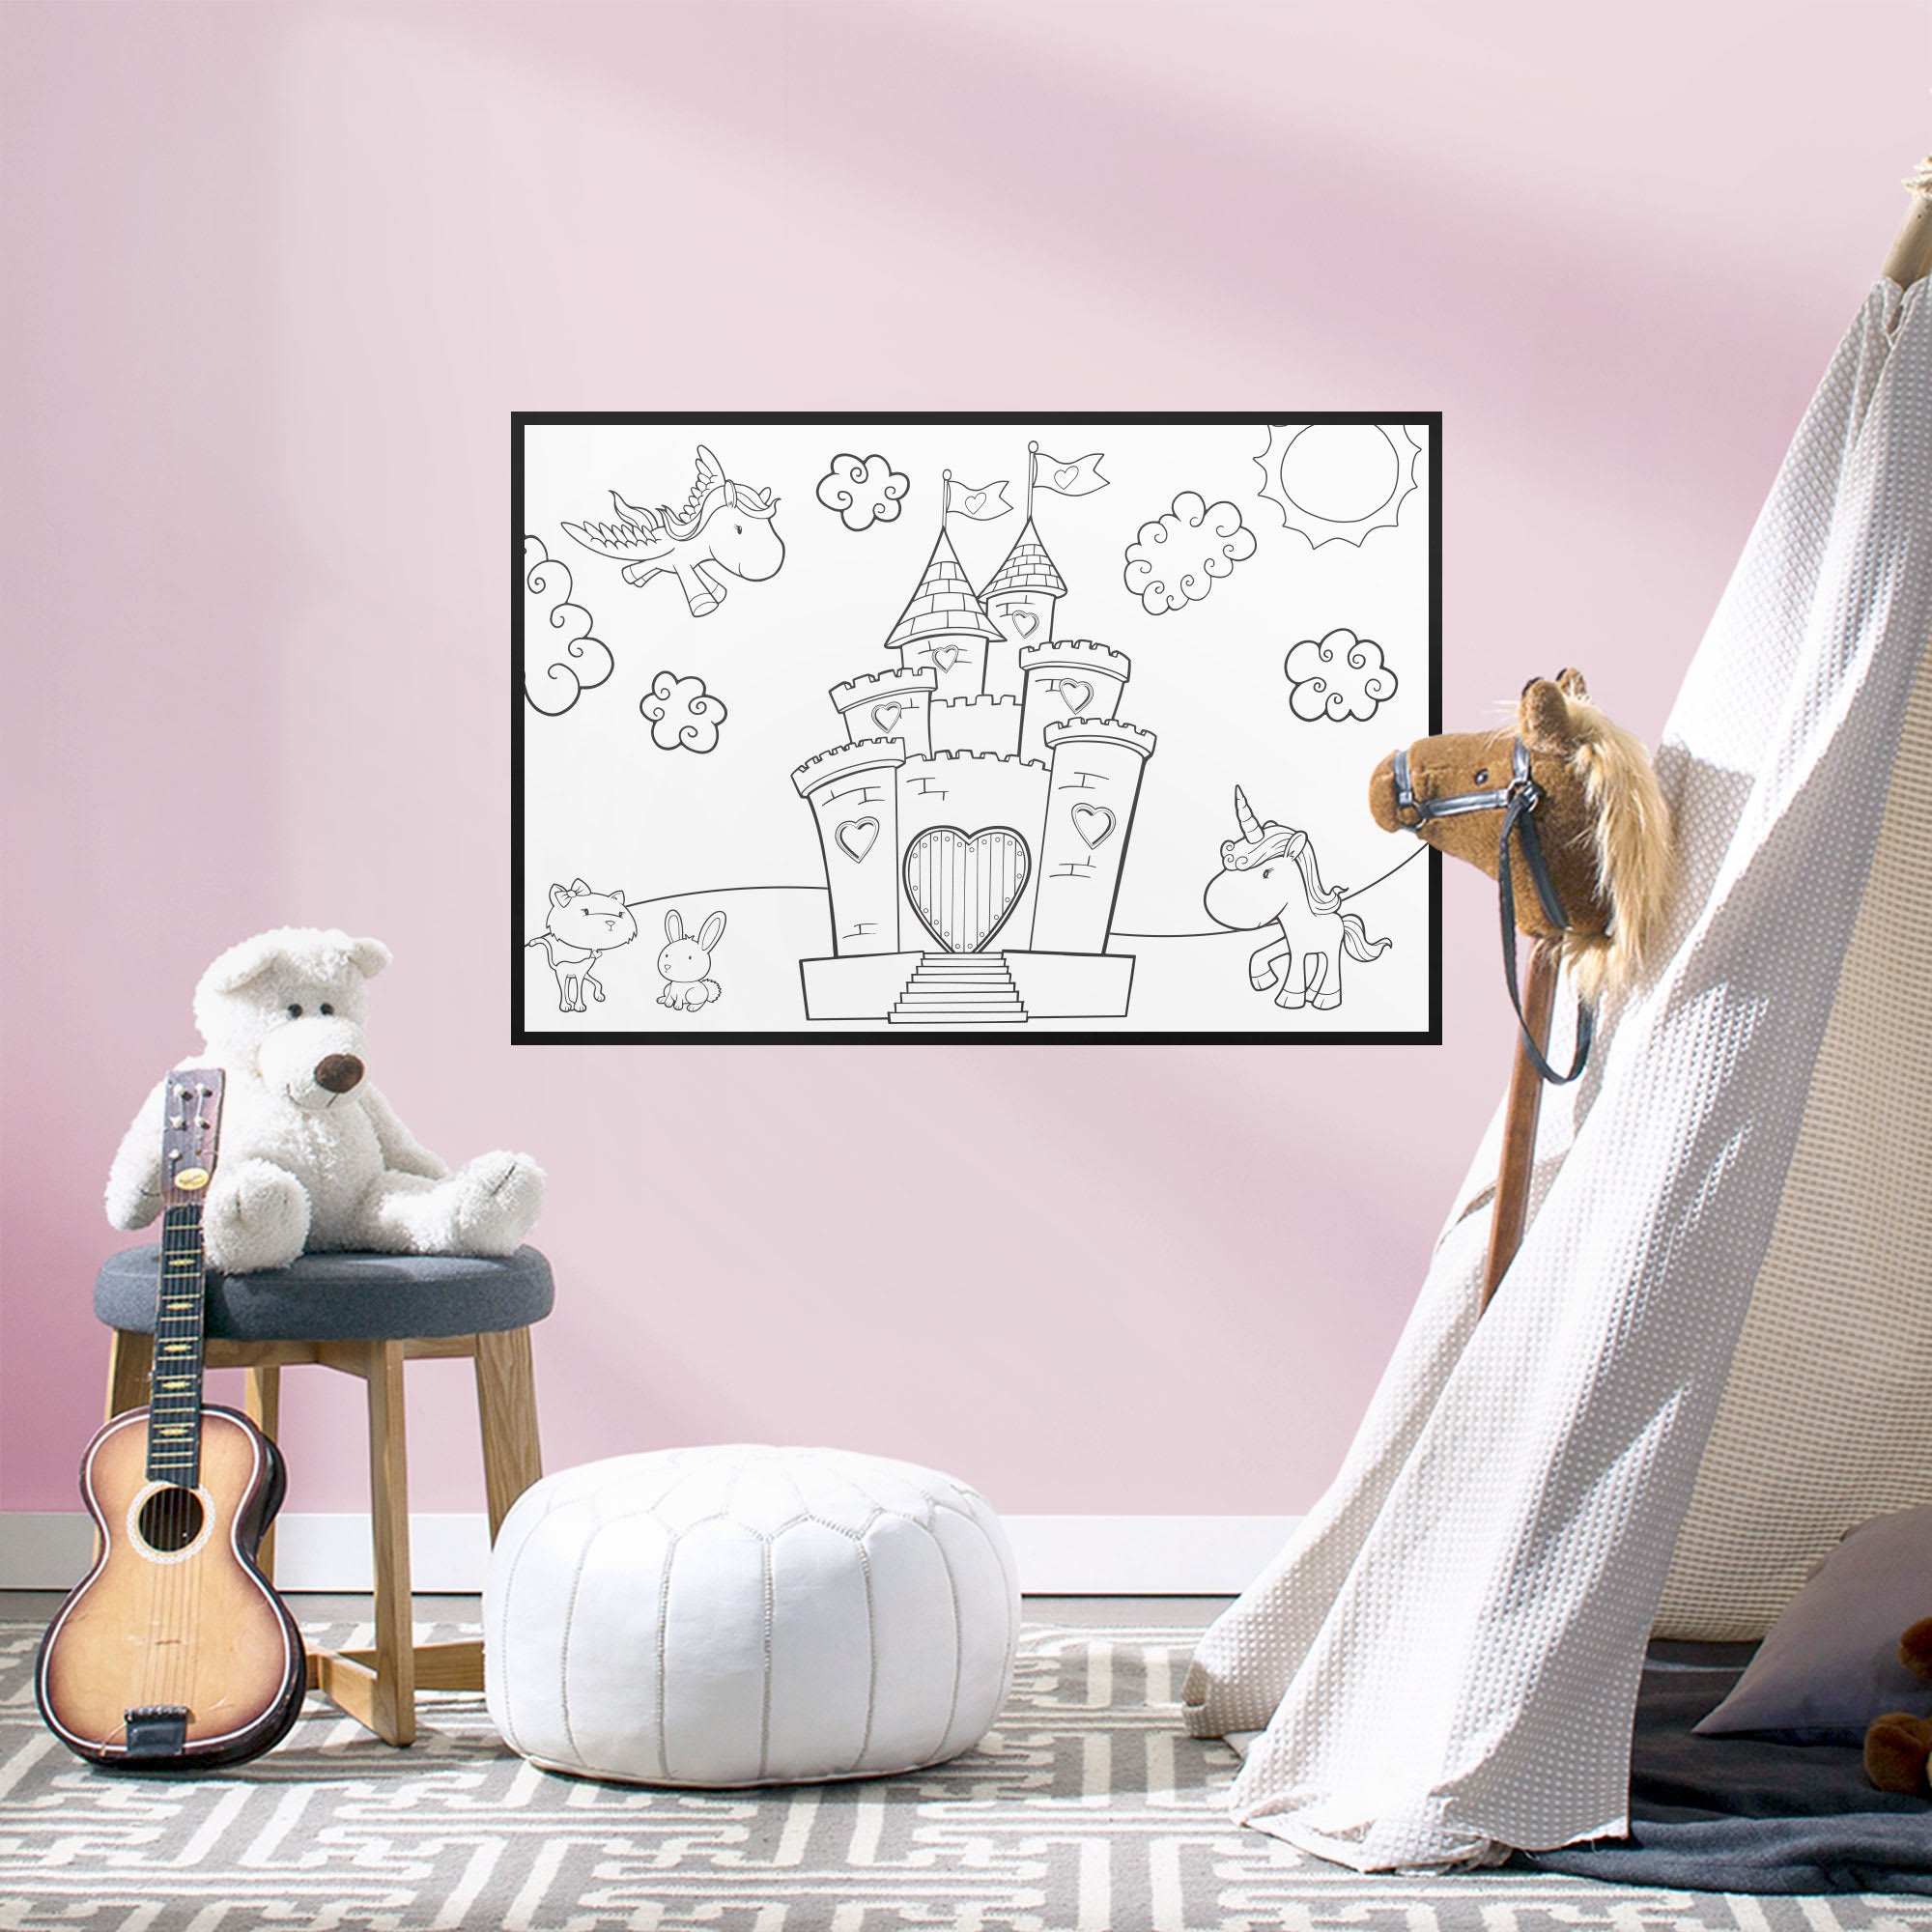 Coloring Sheet: Castle & Unicorn - Removable Dry Erase Vinyl Decal 38.0"W x 26.0"H by Fathead